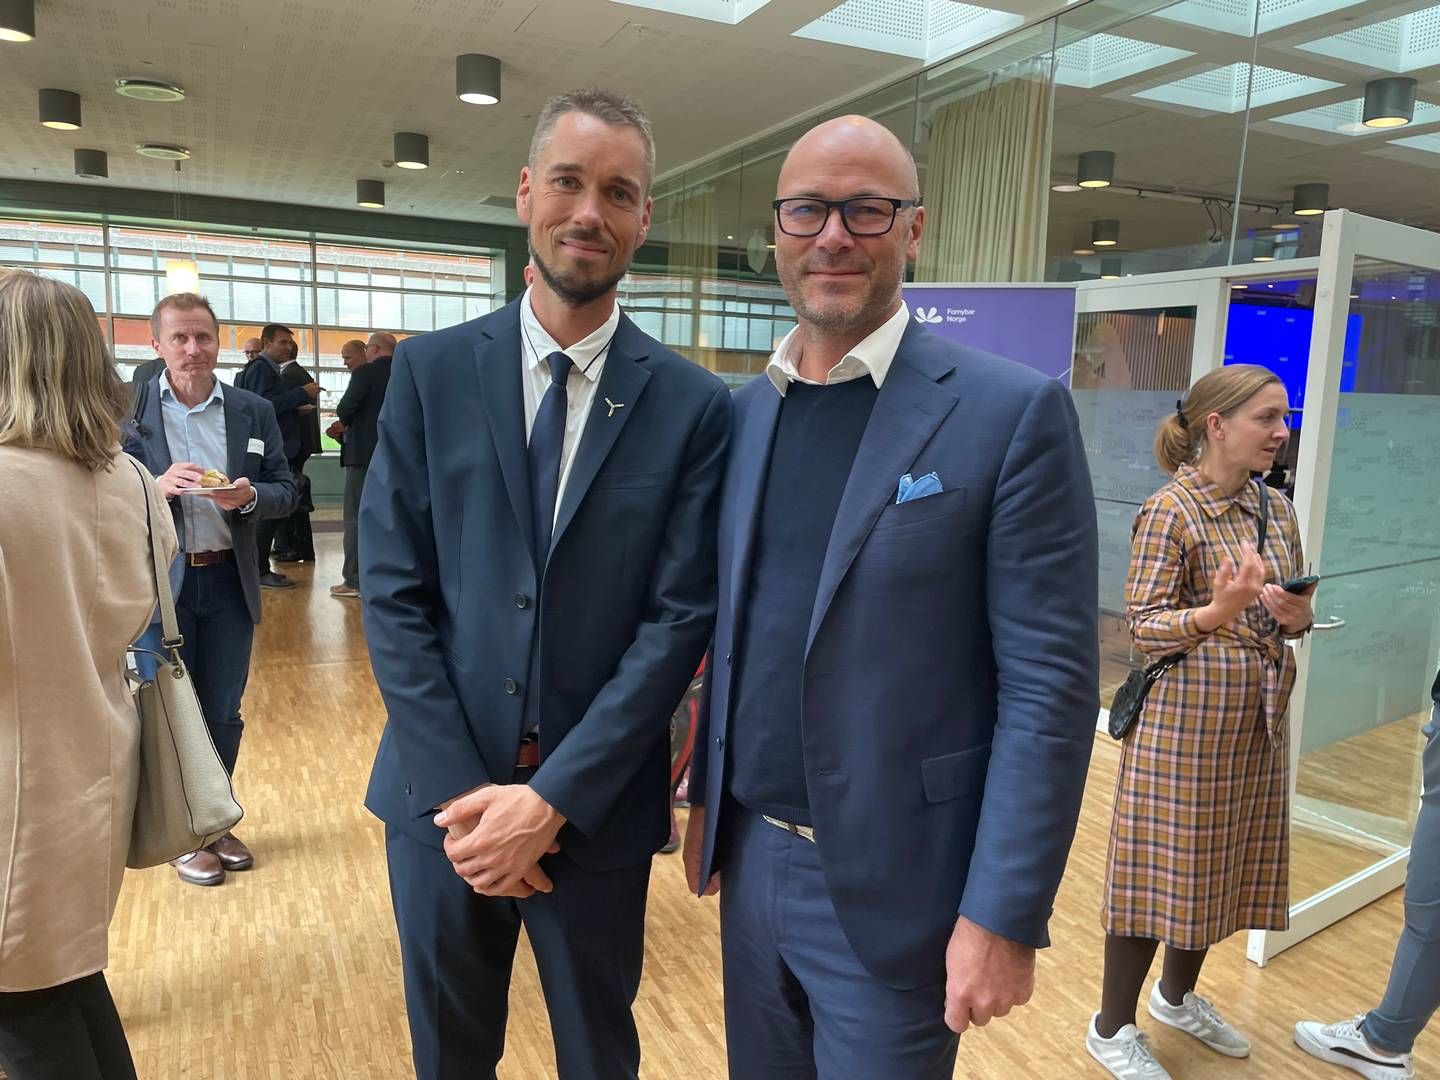 NO BID: Simen Elvestad (right) is CEO of Seagust. Here, he is standing with Christian Kjær Larsen, technical project manager at Vattenfall, with whom Seagust collaborates on the Norwegian continental shelf. The two partners are now withdrawing from Sørlige Nordsjø II.